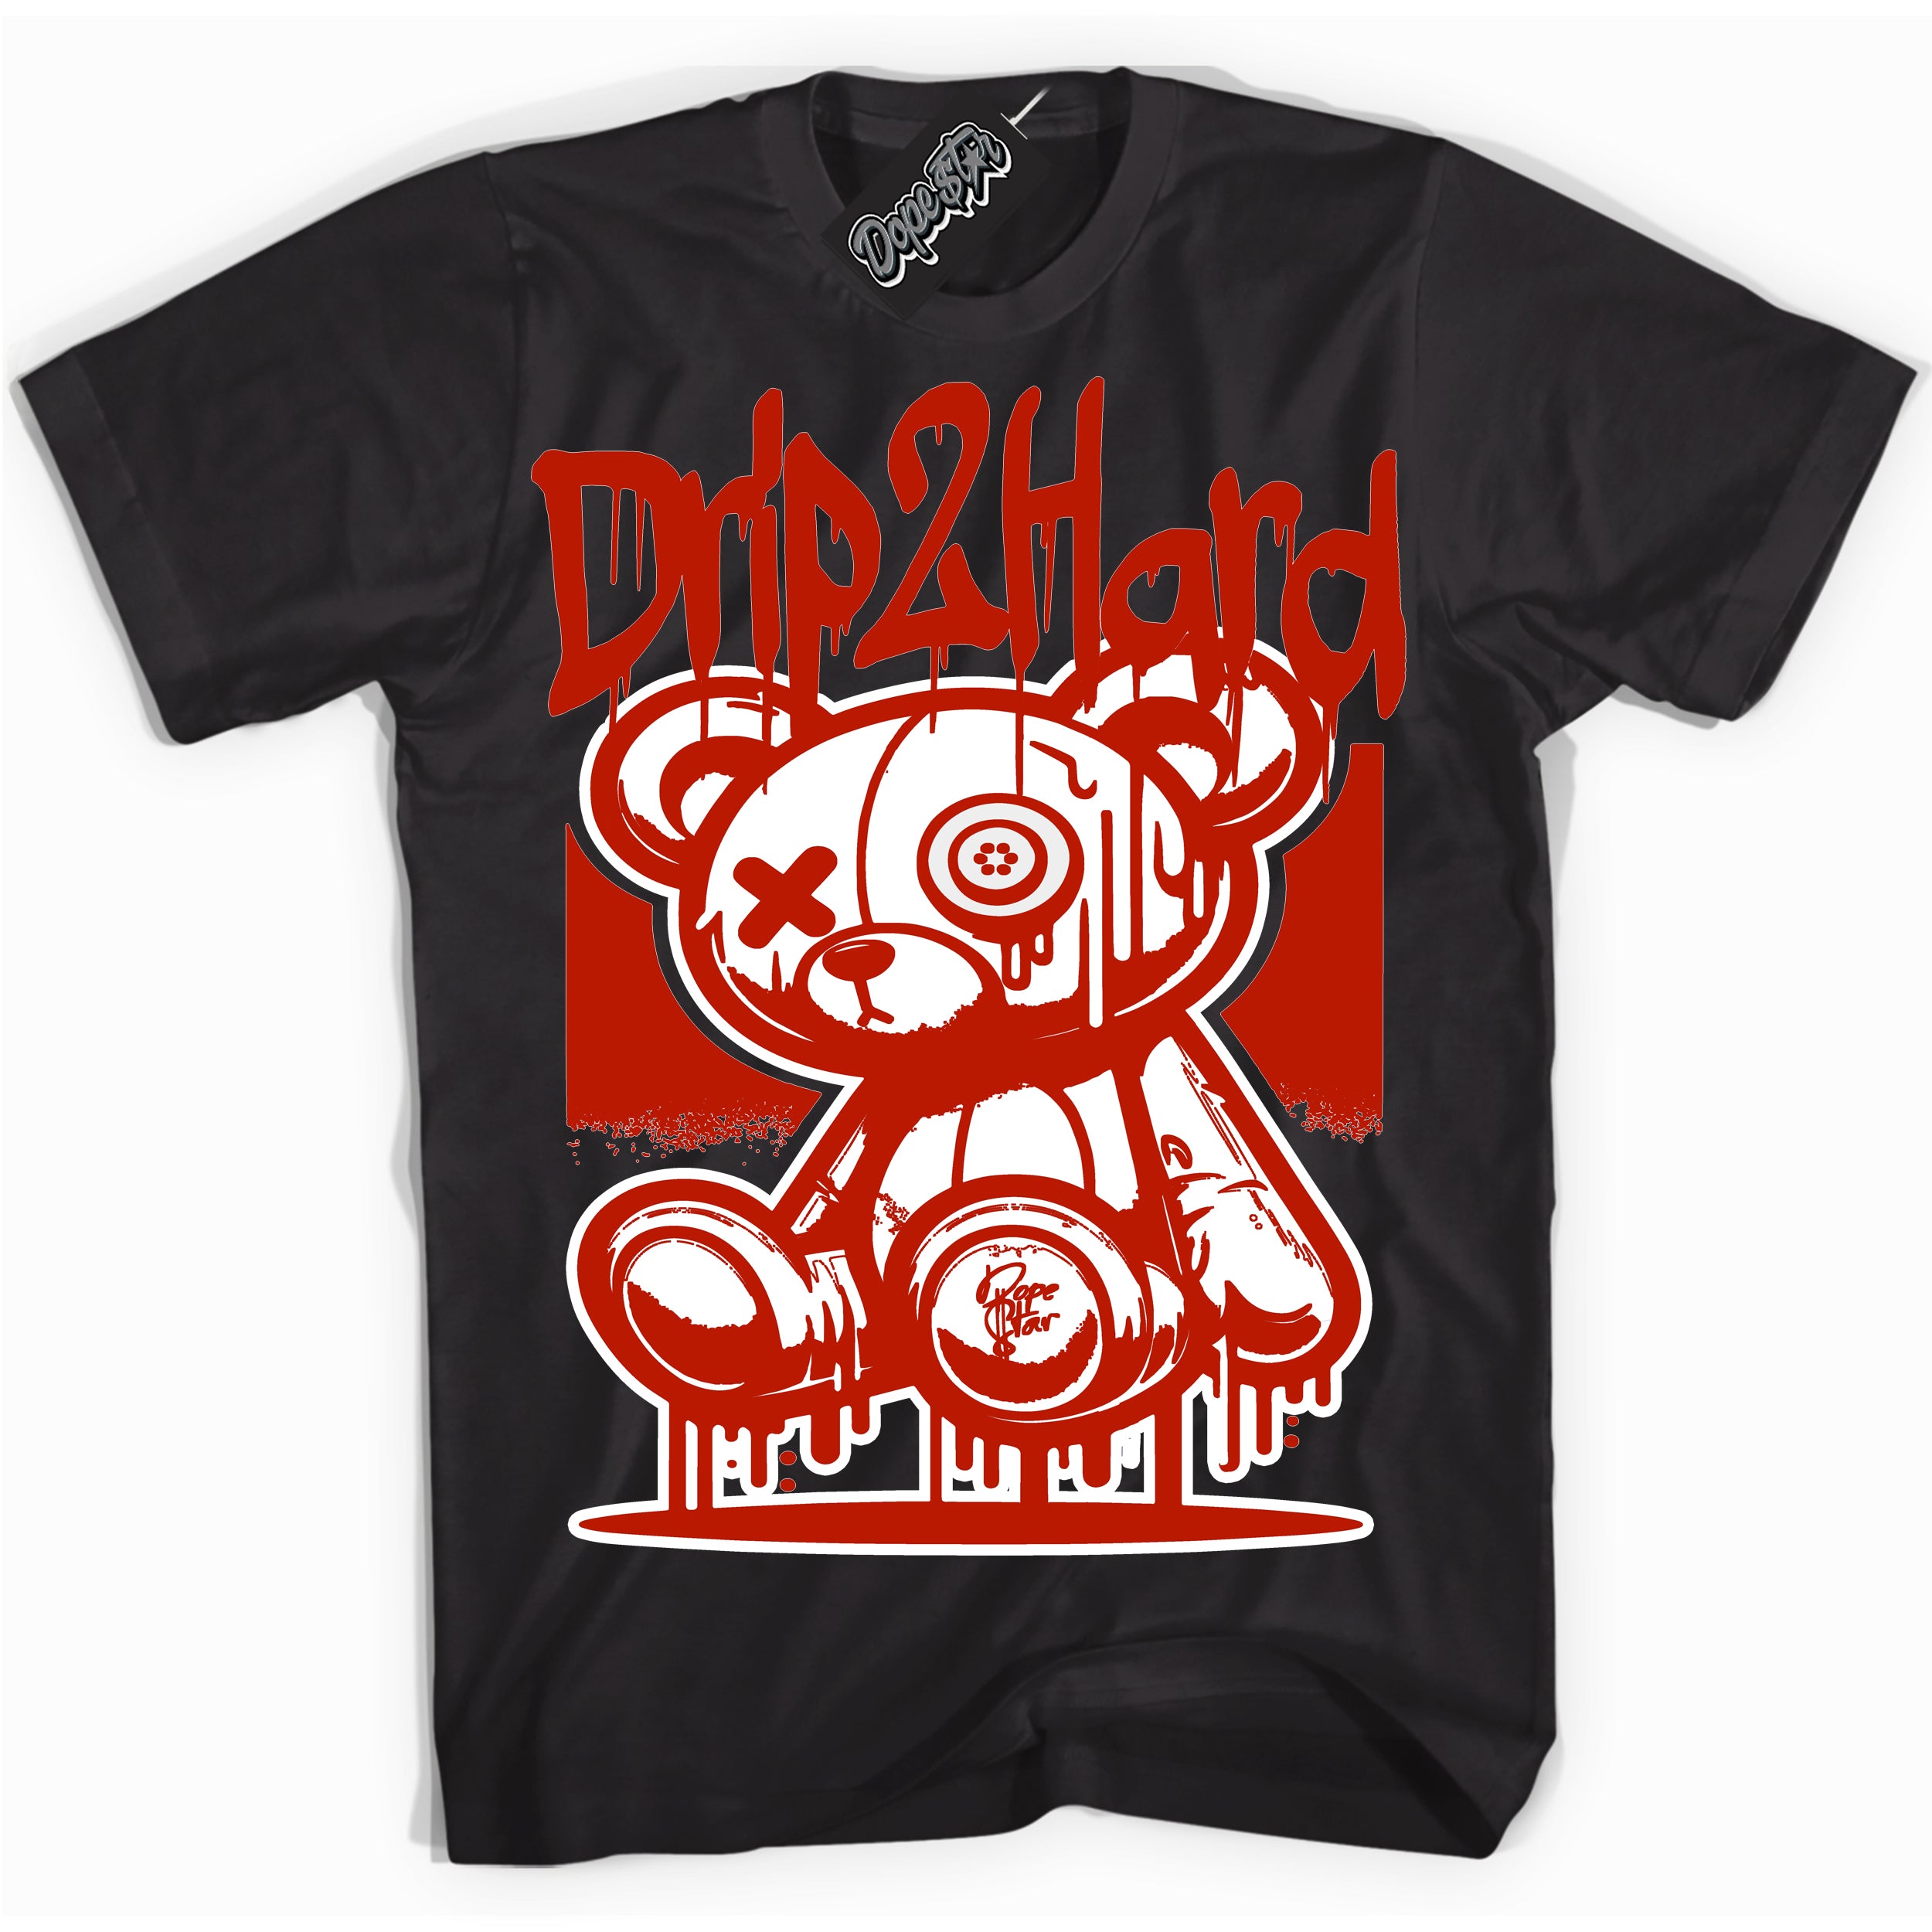 Cool Black graphic tee with “ Drip 2 Hard ” design, that perfectly matches Cherry 11s 